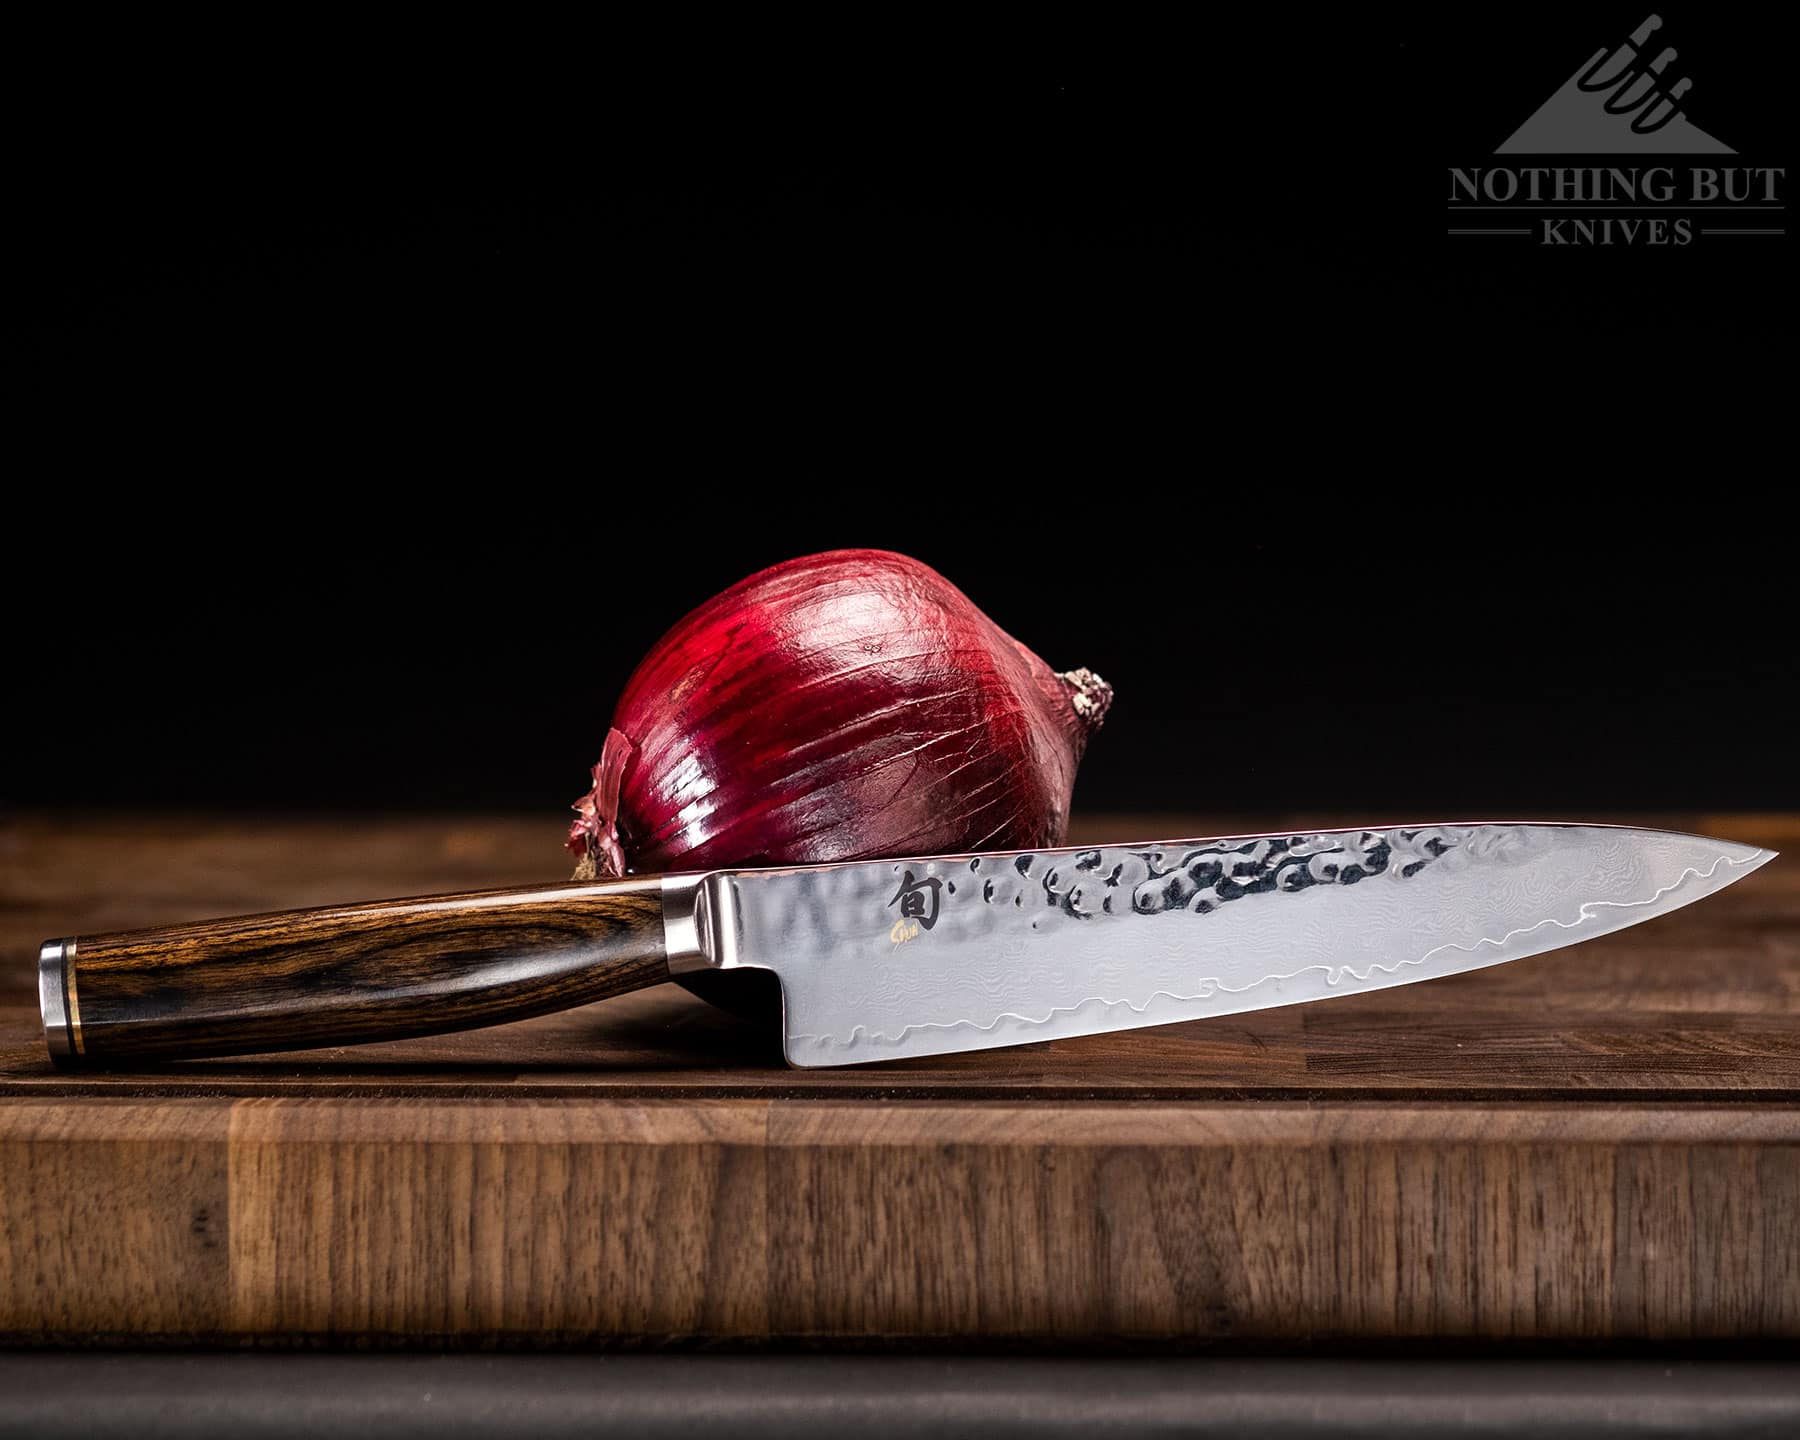 The excellent Shun Premier utility knife is shown here on a cutting board with a red onion. 